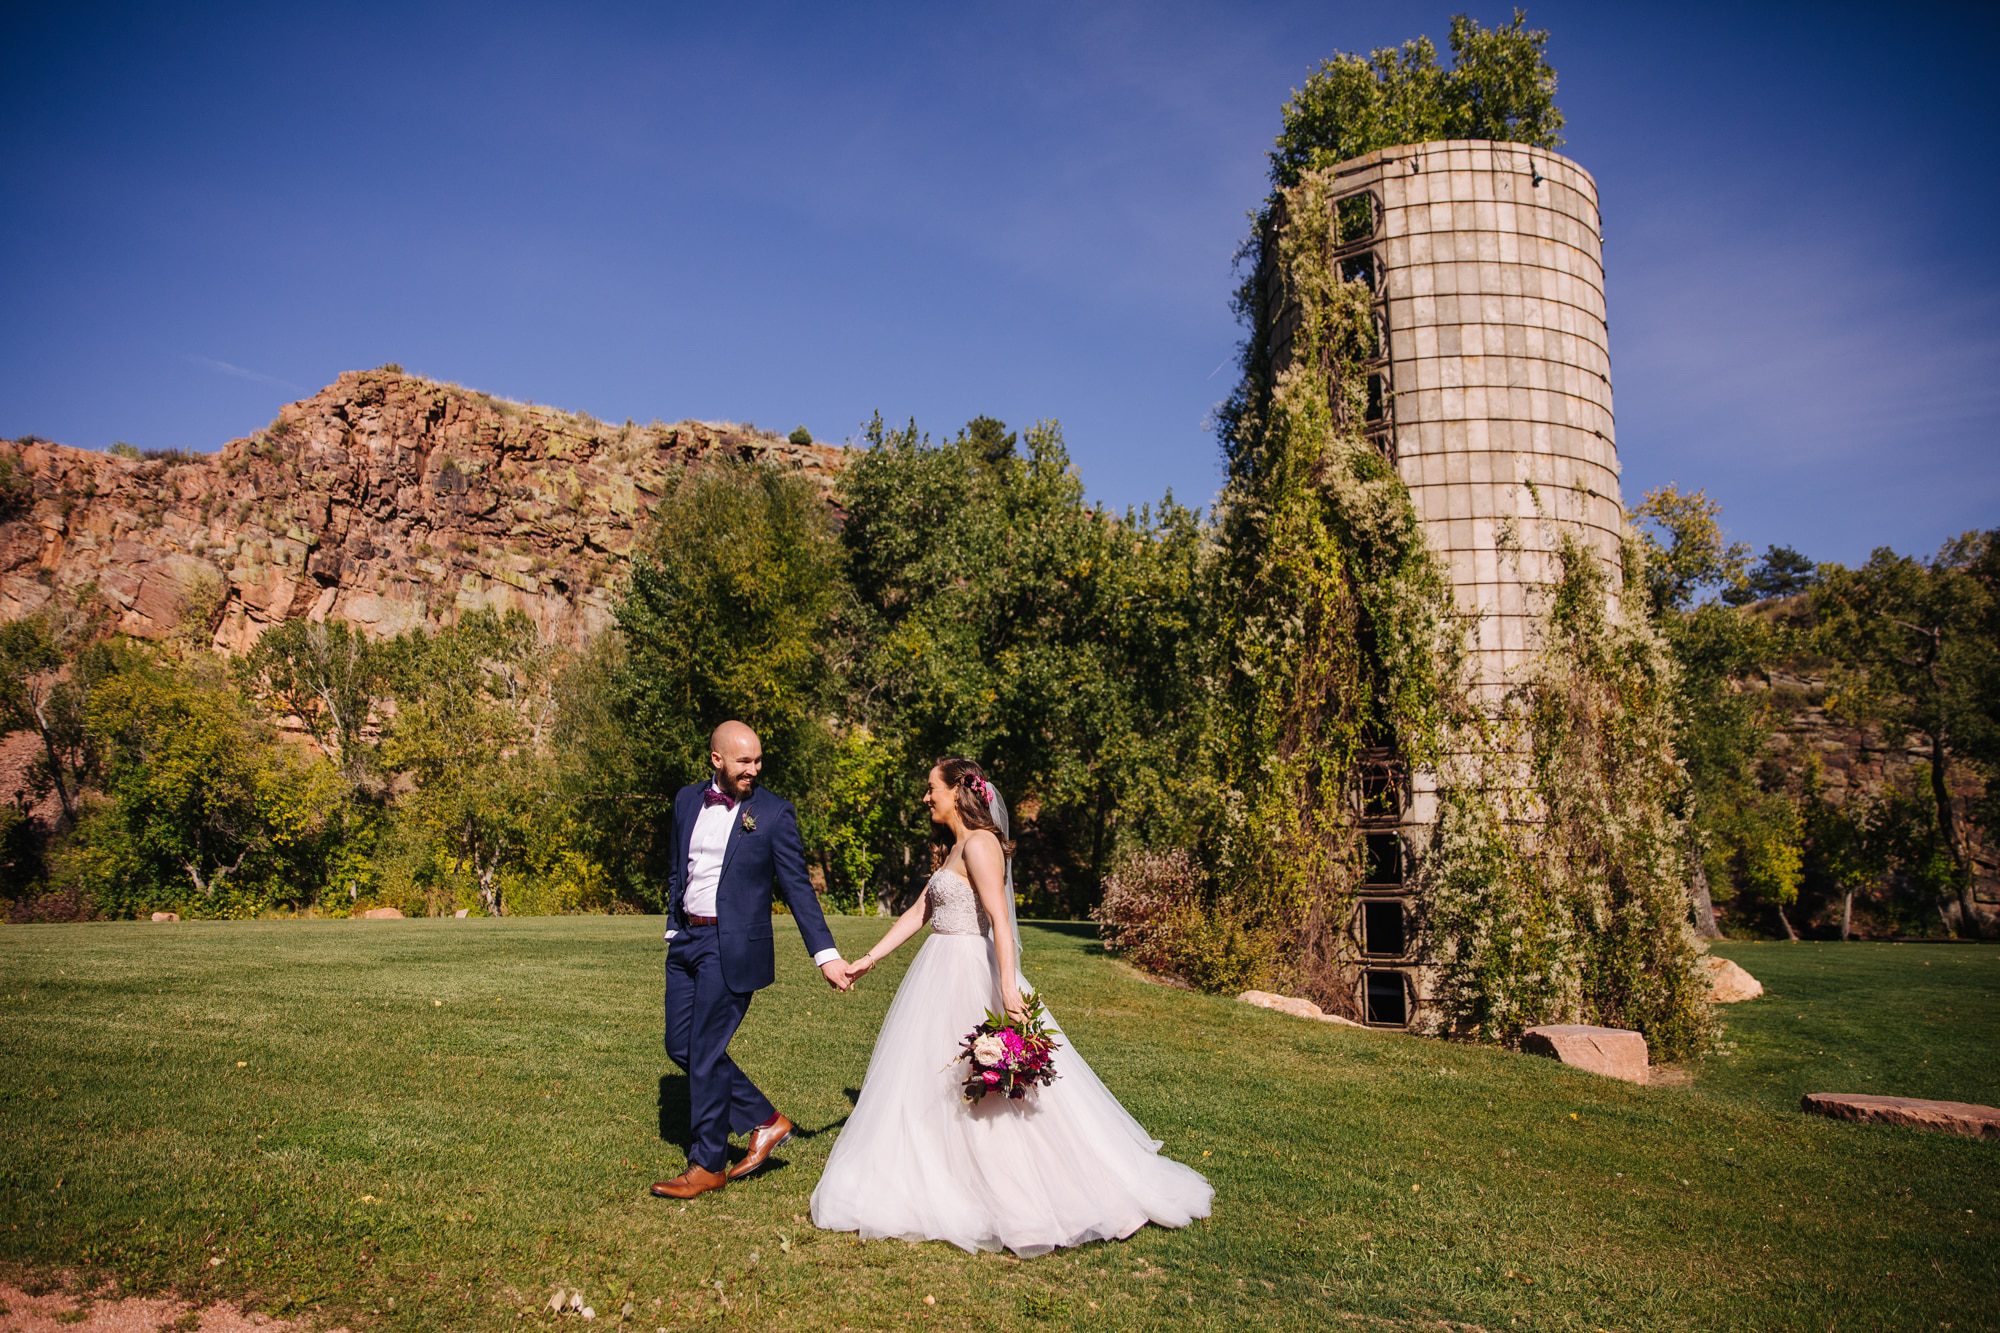 planet bluegrass wedding, lyons wedding venue, outdoor wedding venue in colorado, summer wedding, colorado wedding venue, colorado wedding photographer, summer wedding in colorado, farm wedding, bride and groom portraits, bride with veil, strapless wedding dress, blue suit groom, groom with bow tie, beaded wedding dress, colorful wedding flowers, colorful wedding photographer, silos at wedding